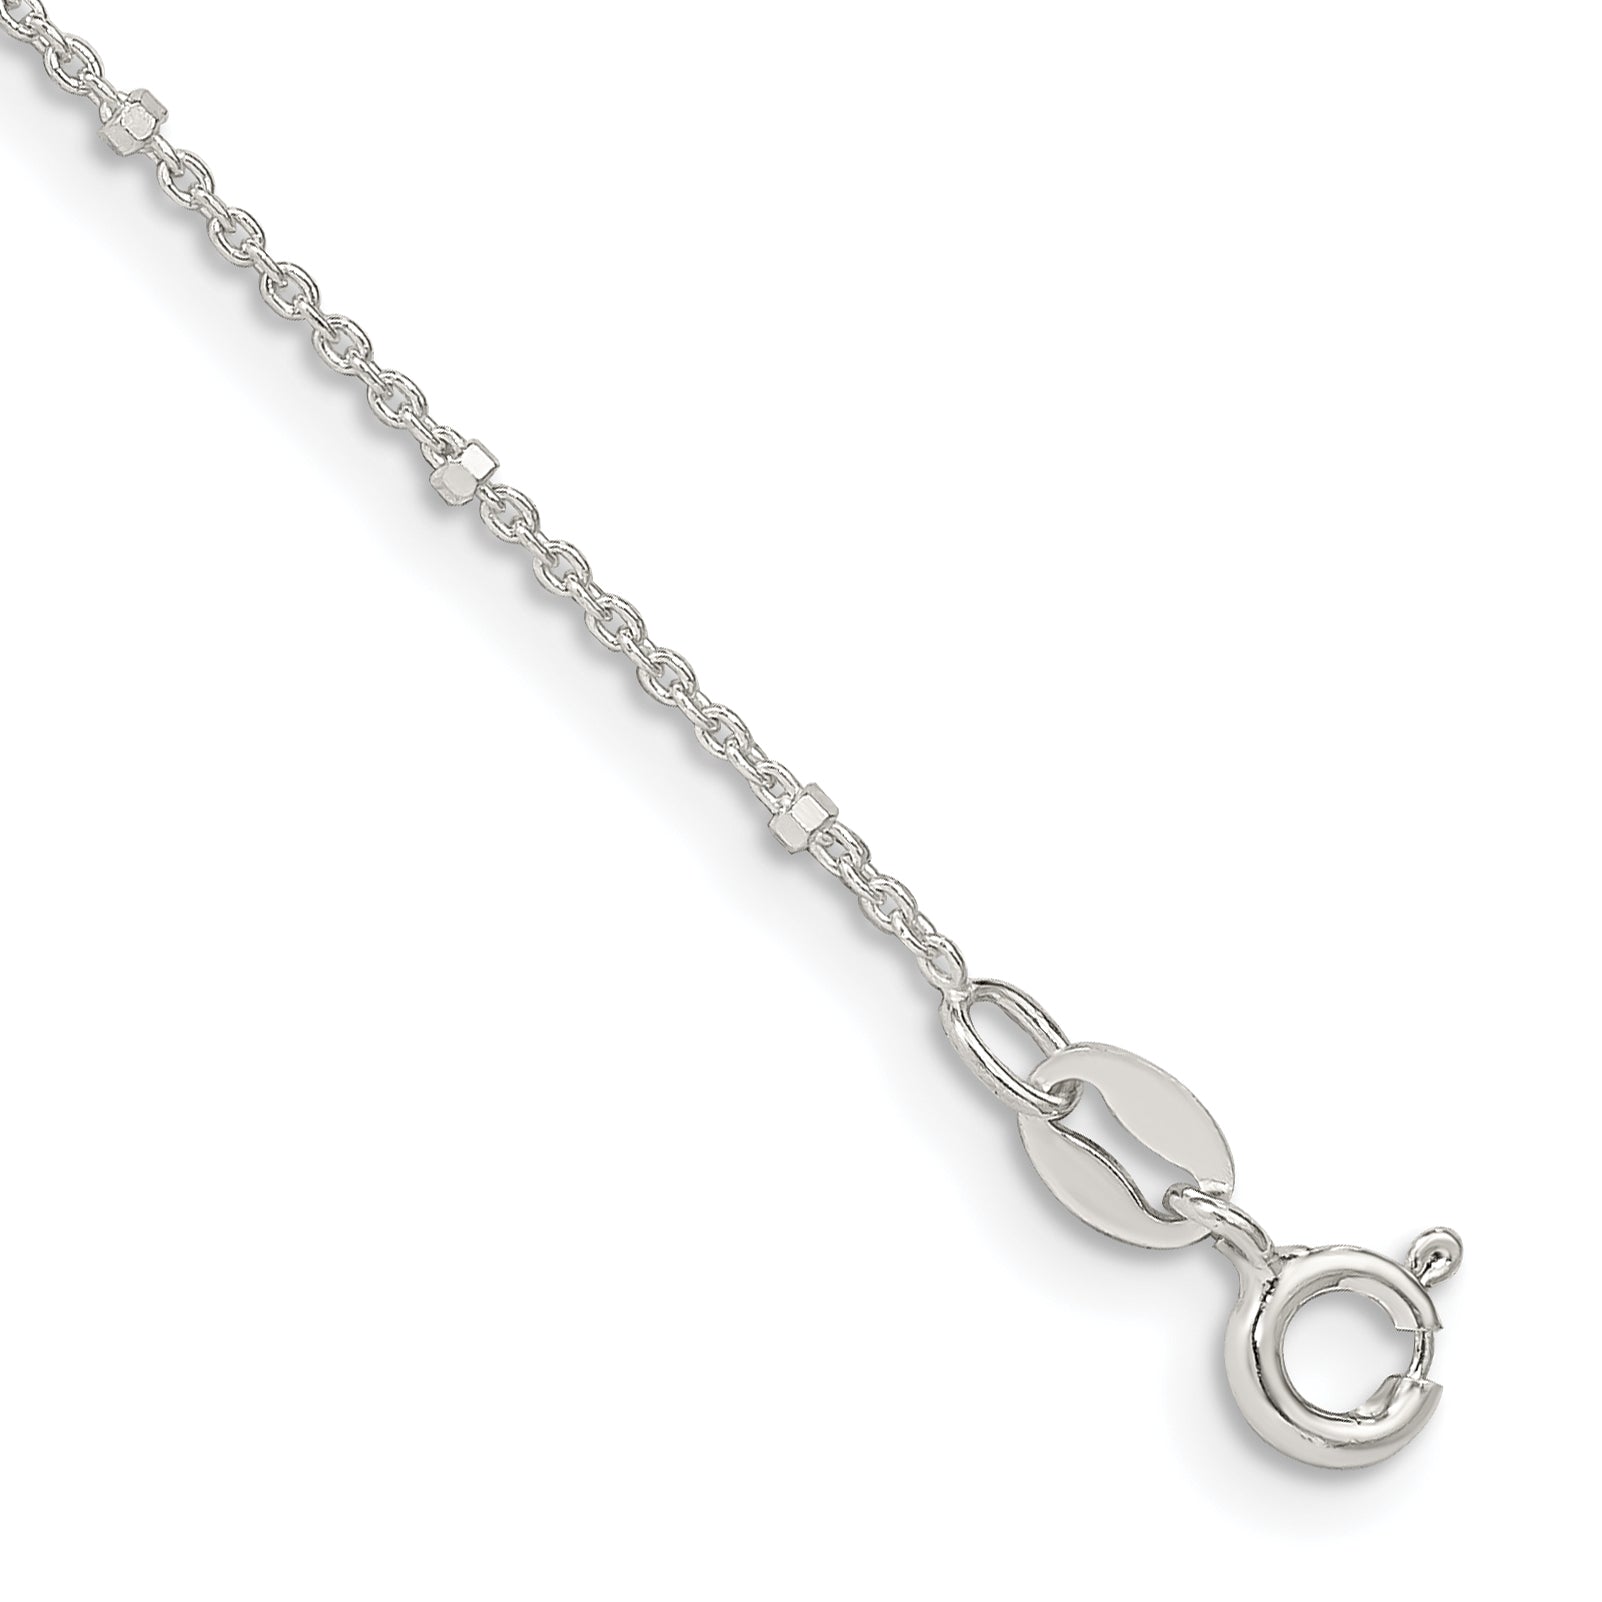 Sterling Silver 1.25mm Rolo with Beads Chain Anklet